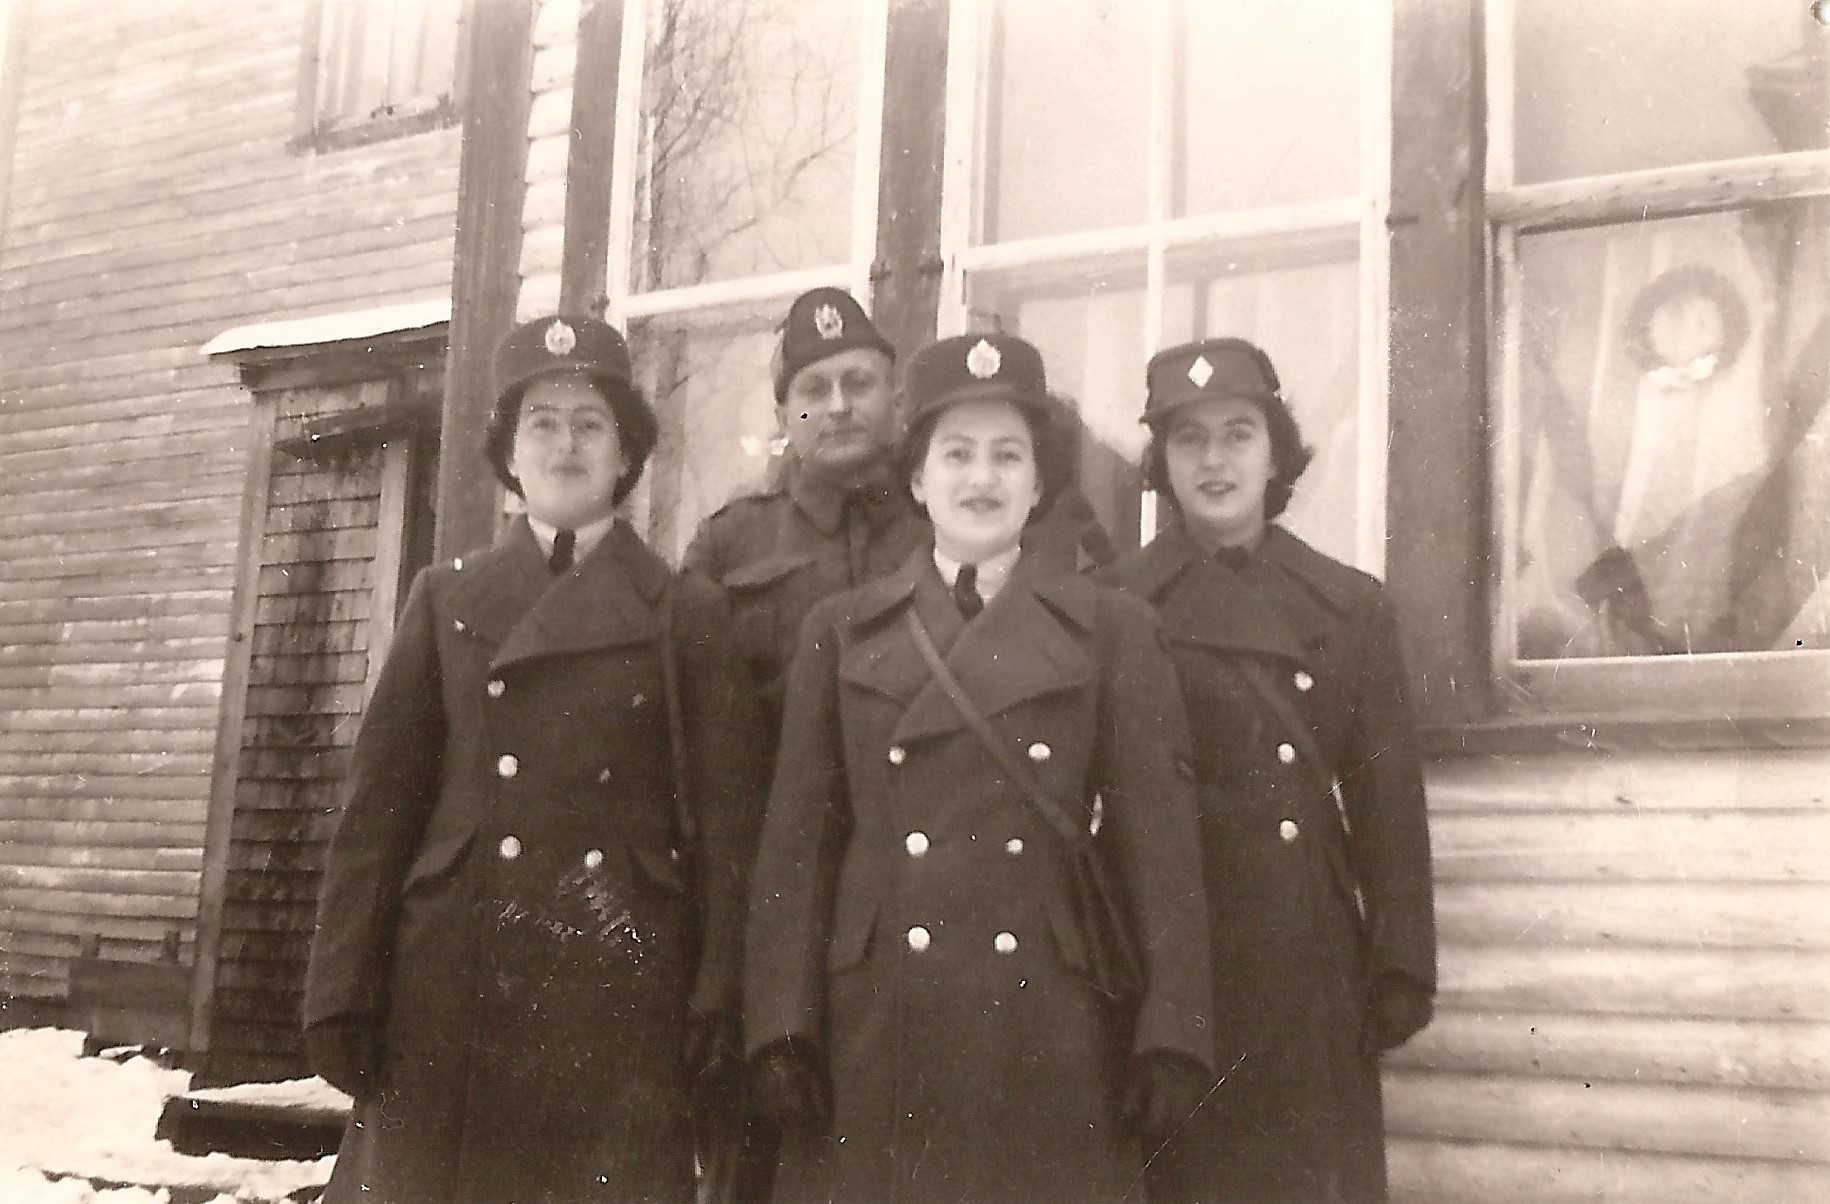 Black and white photograph. Three young women stand in front of their father, in front of a house. They are all in winter military uniforms and their is snow on the ground.